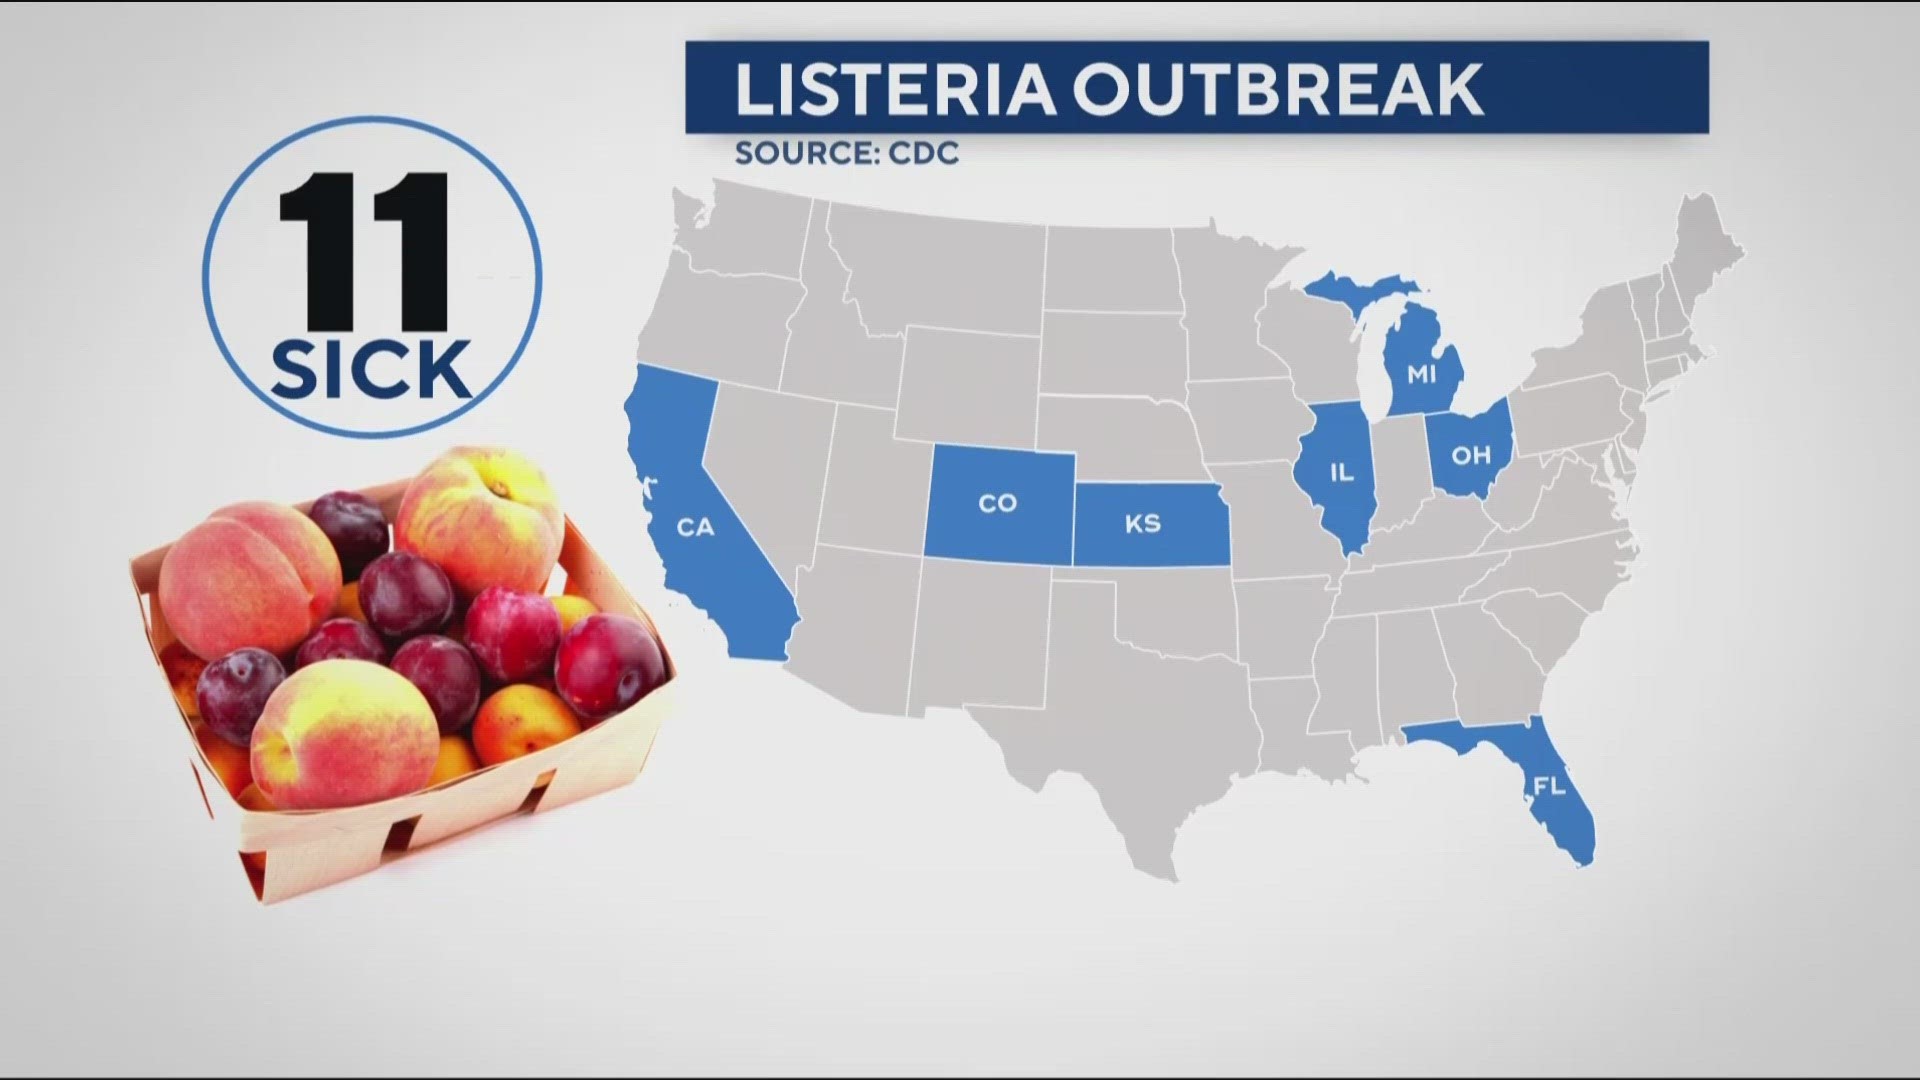 Listeria can cause serious and sometimes fatal infections in children, the elderly, pregnant women and others with weakened immune systems.